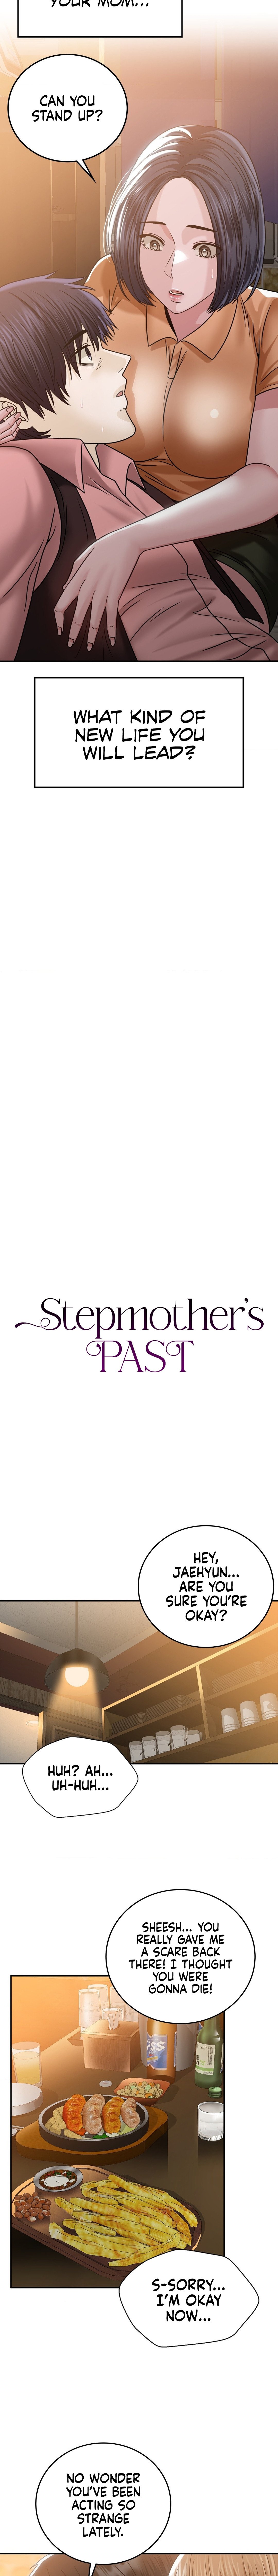 stepmothers-past-chap-8-2